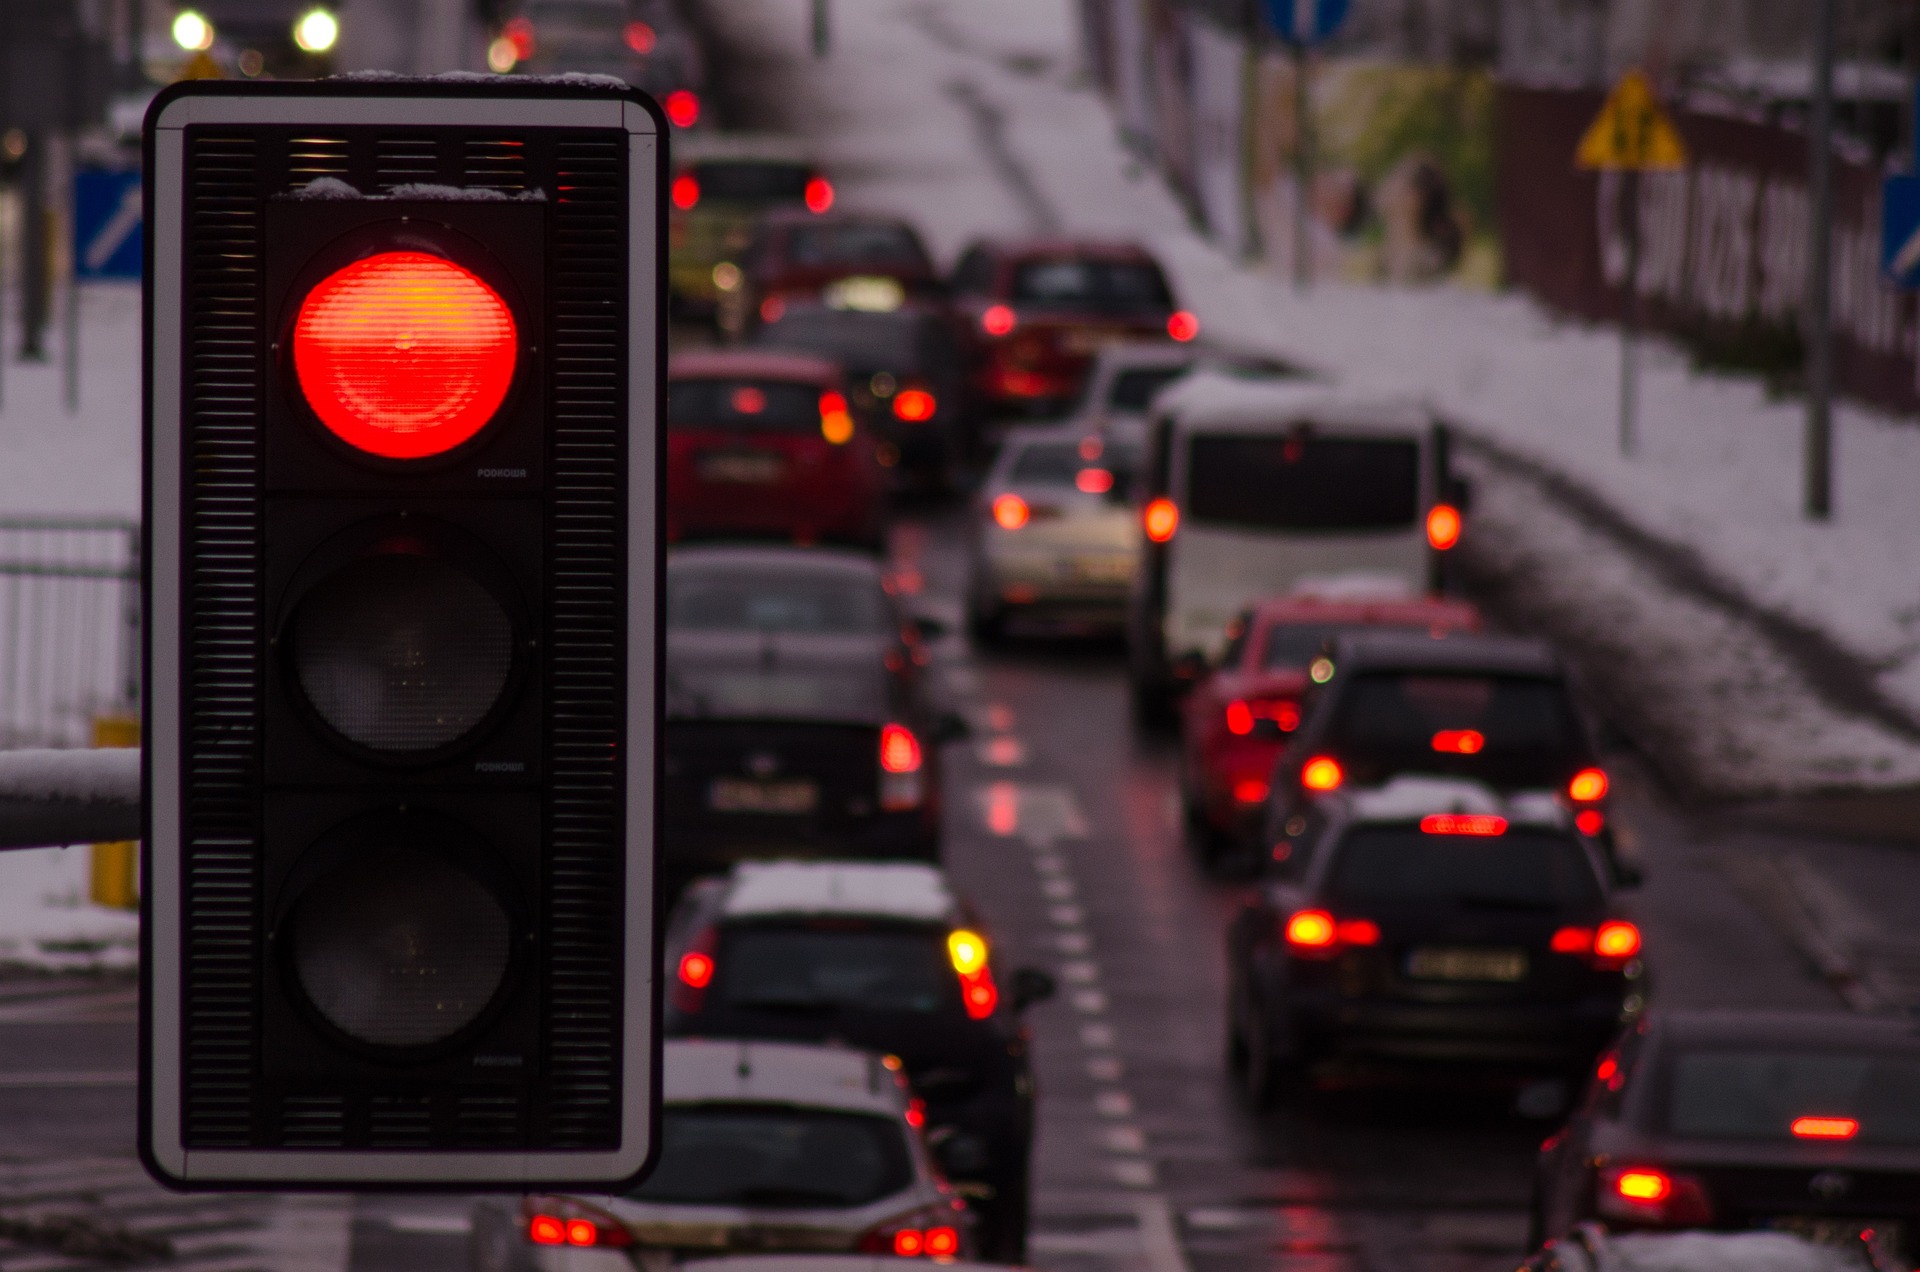 Image by staboslaw from Pixabay - Federal Highway Administration releases updated traffic control manual